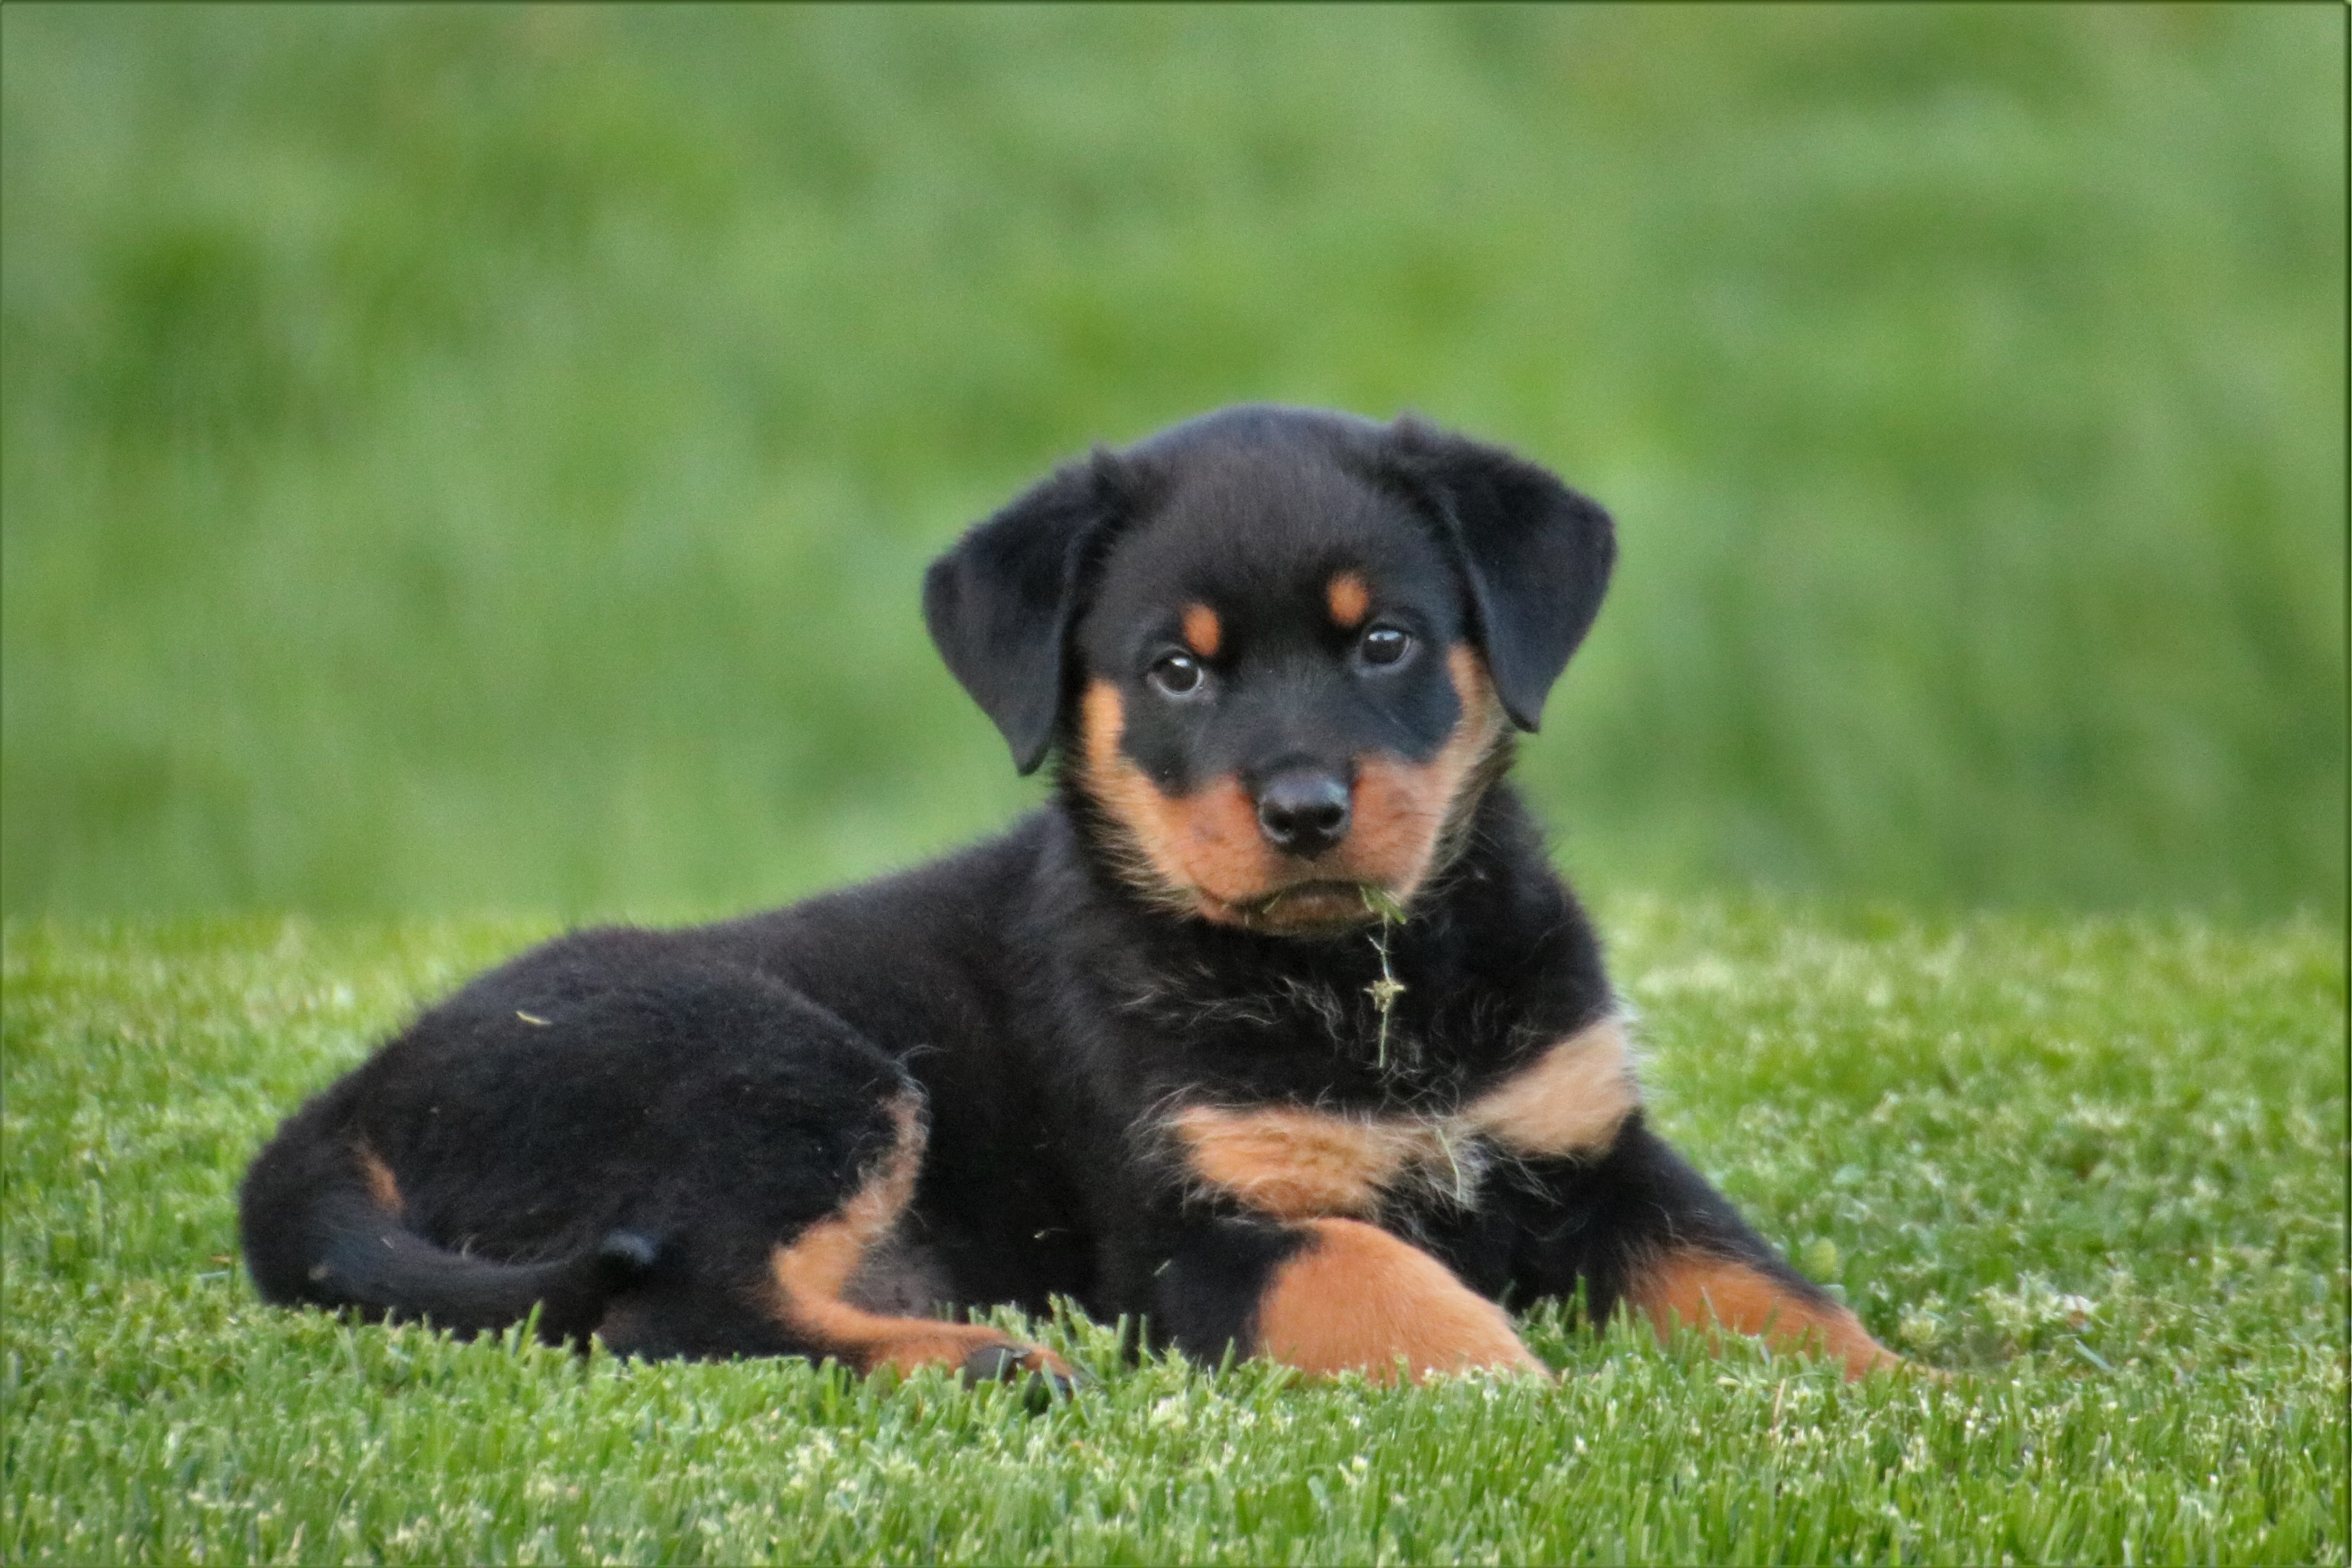 Free images of Rottweiler 1080p, 4k, 5k, Hd Wallpapers